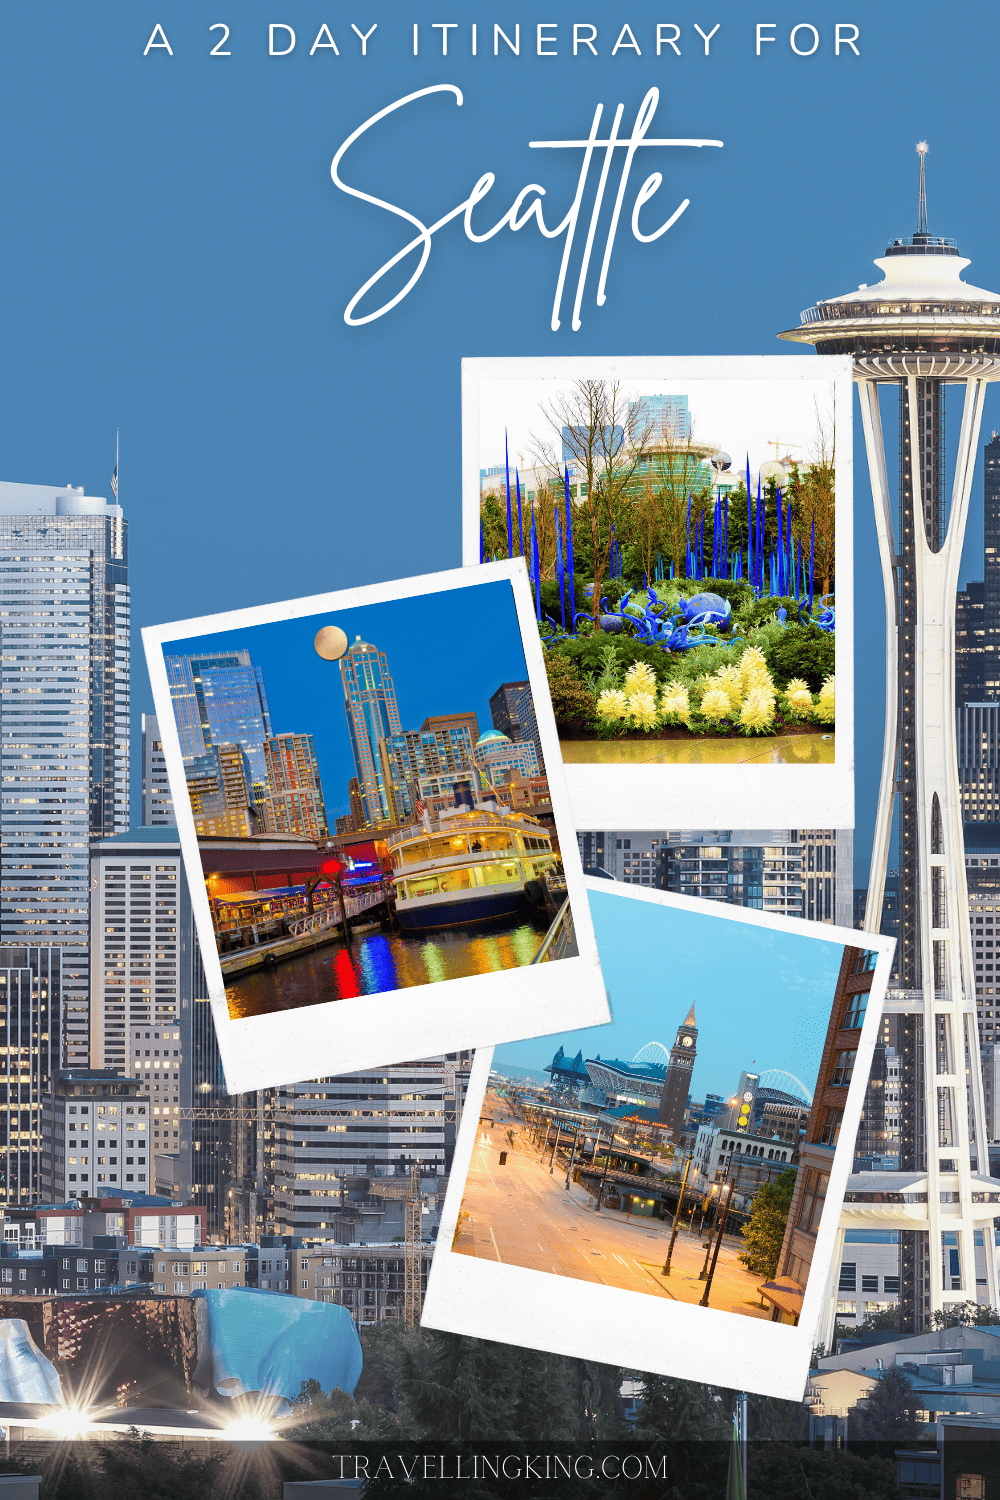 48 hours in Seattle - A 2 day Itinerary